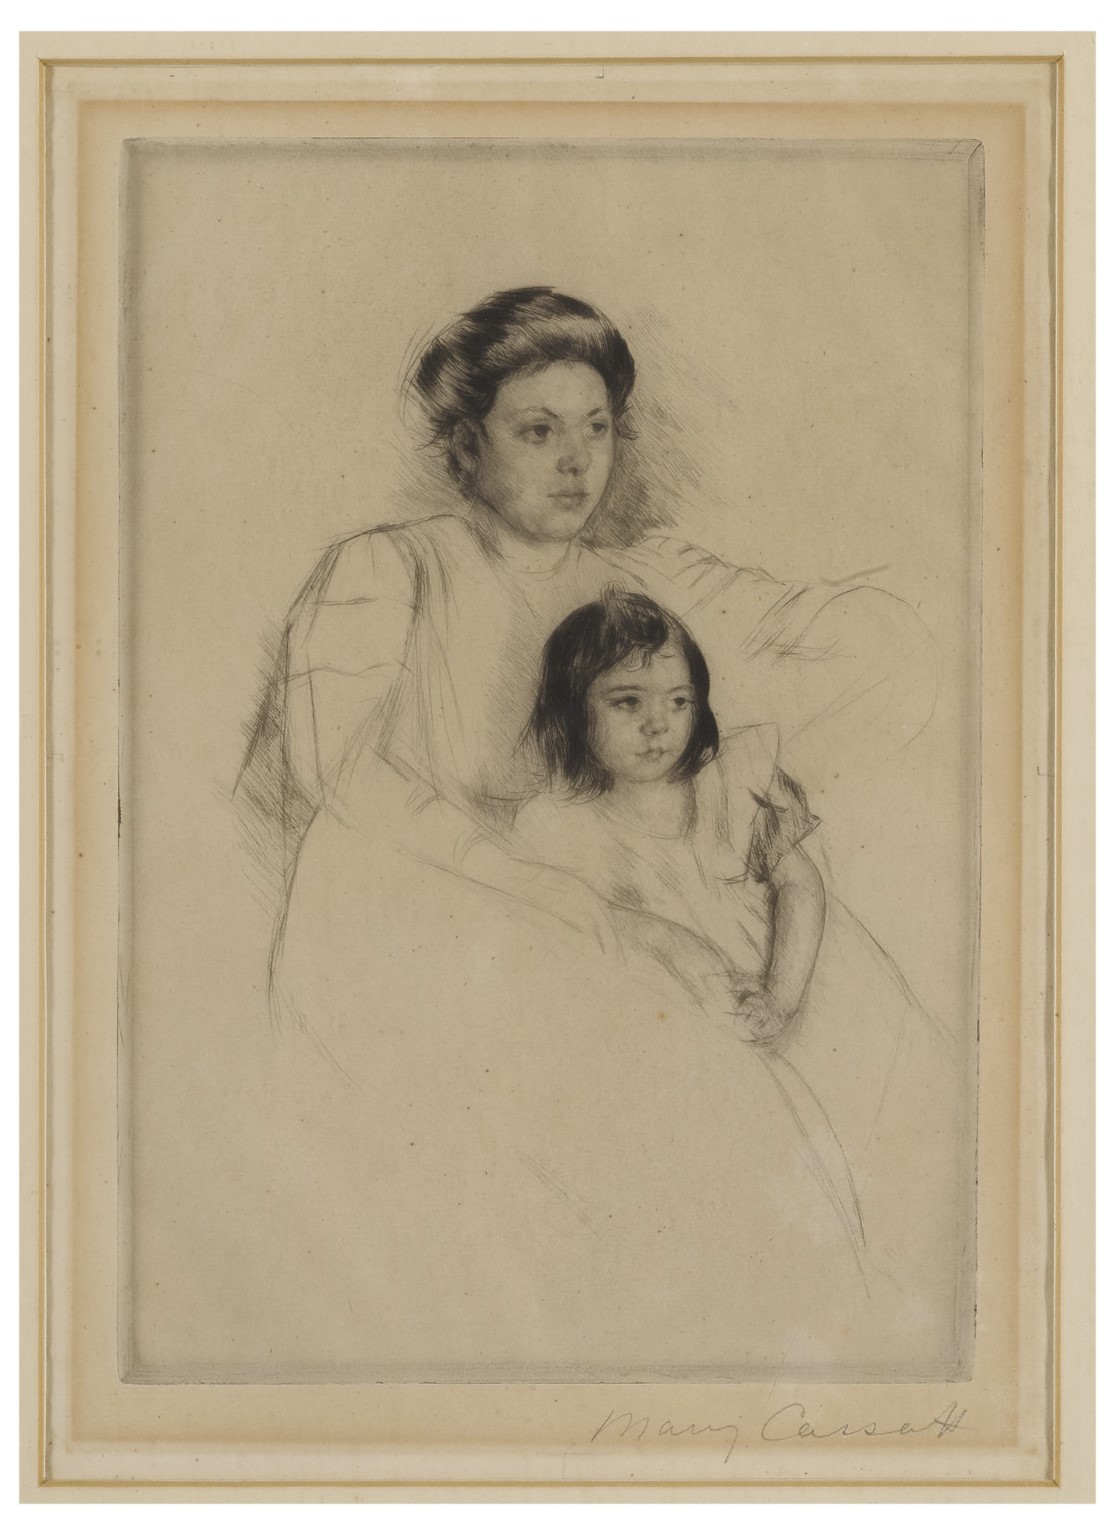 Margot Leaning Against Her Mother (B. 175)